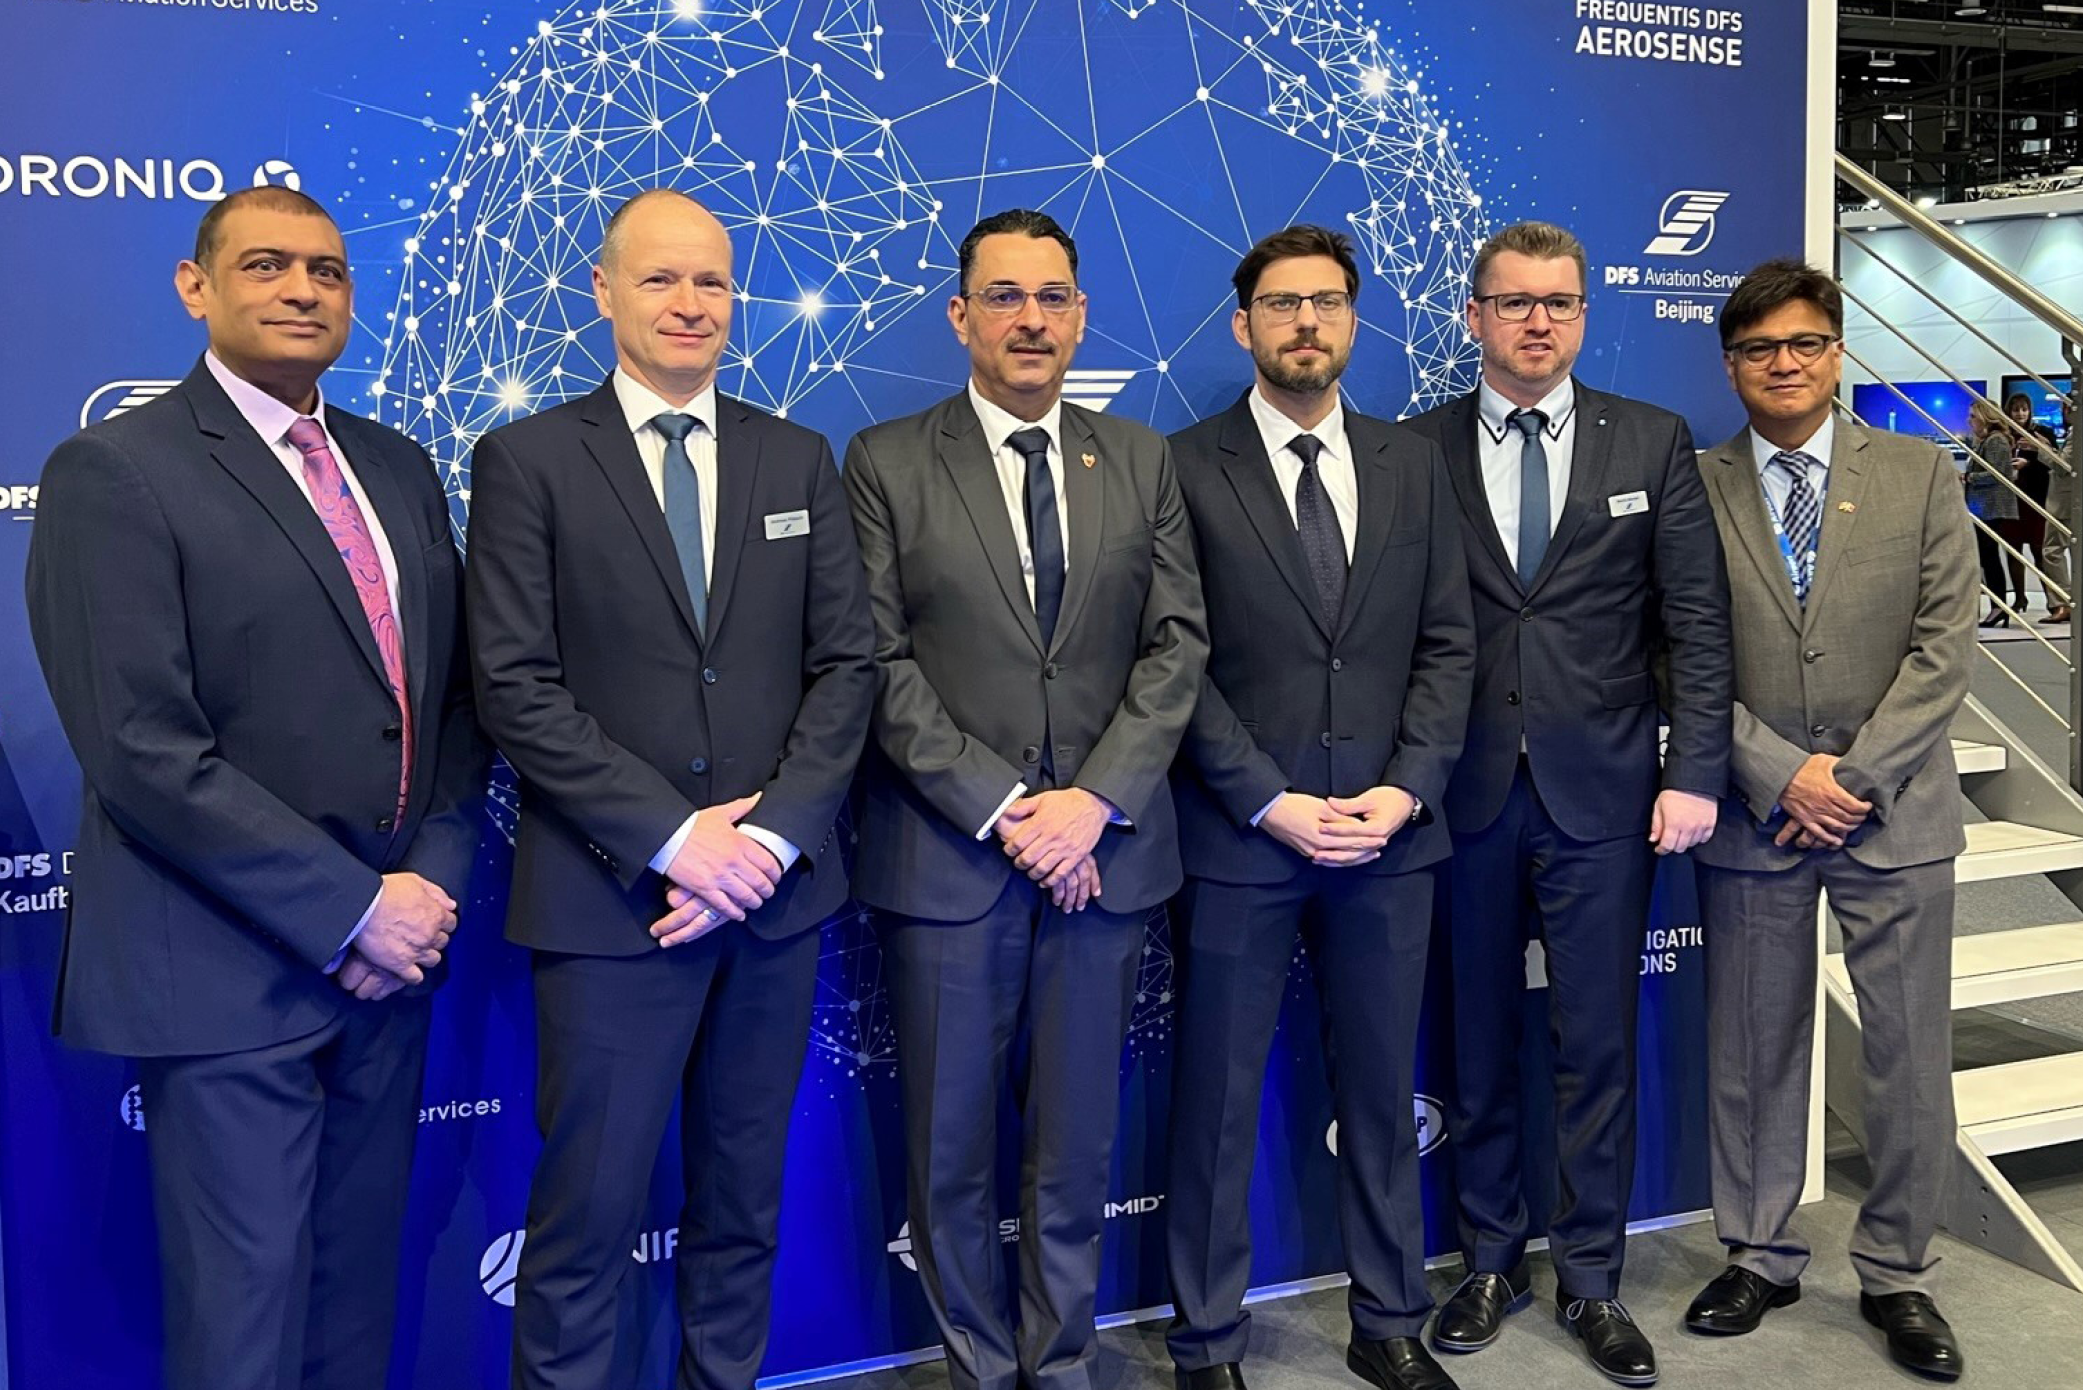 Our colleagues from DAS Bahrain were very pleased to meet Hussain Ahmed Al-Shuail (Acting Under-Secretary Civil Aviation, BCAA) and Yaseen Al-Sayed (Director Air Navigation Services, BCAA) in person at Airspace World in Geneva on 8 March.